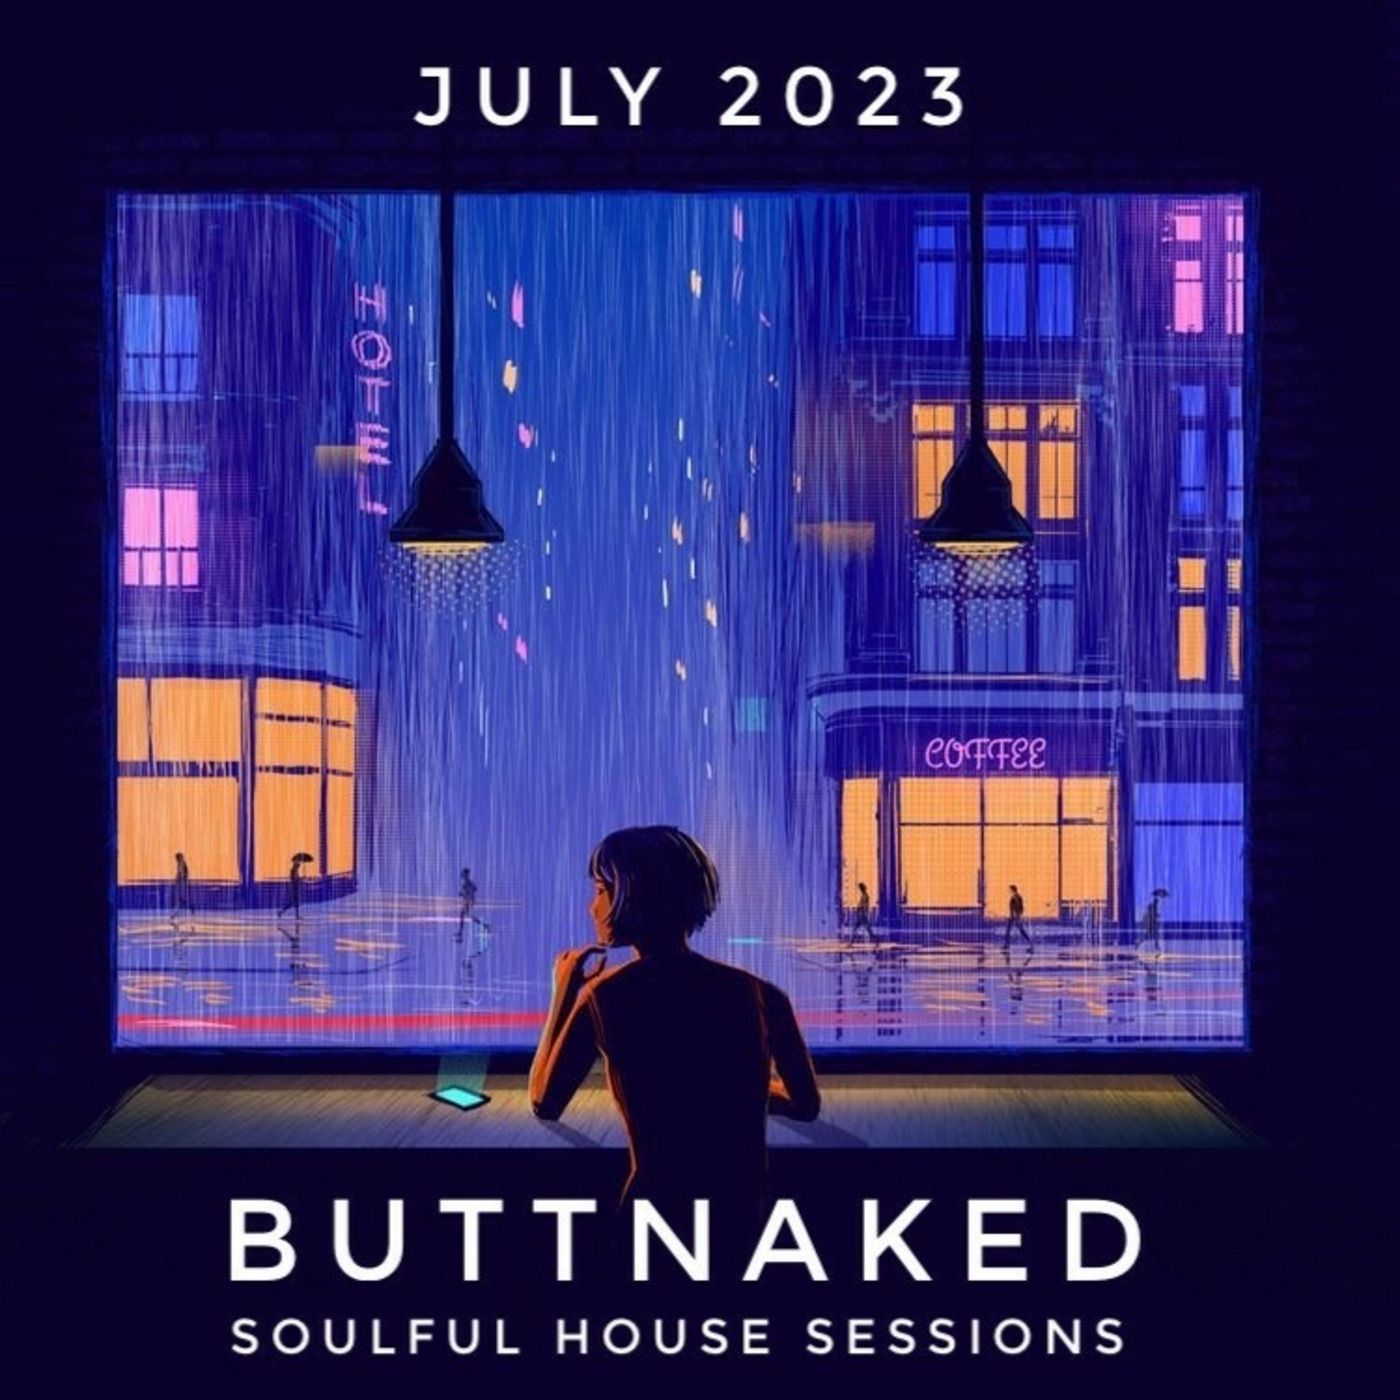 July 2023 - Iain Willis presents The Buttnaked Soulful House Sessions